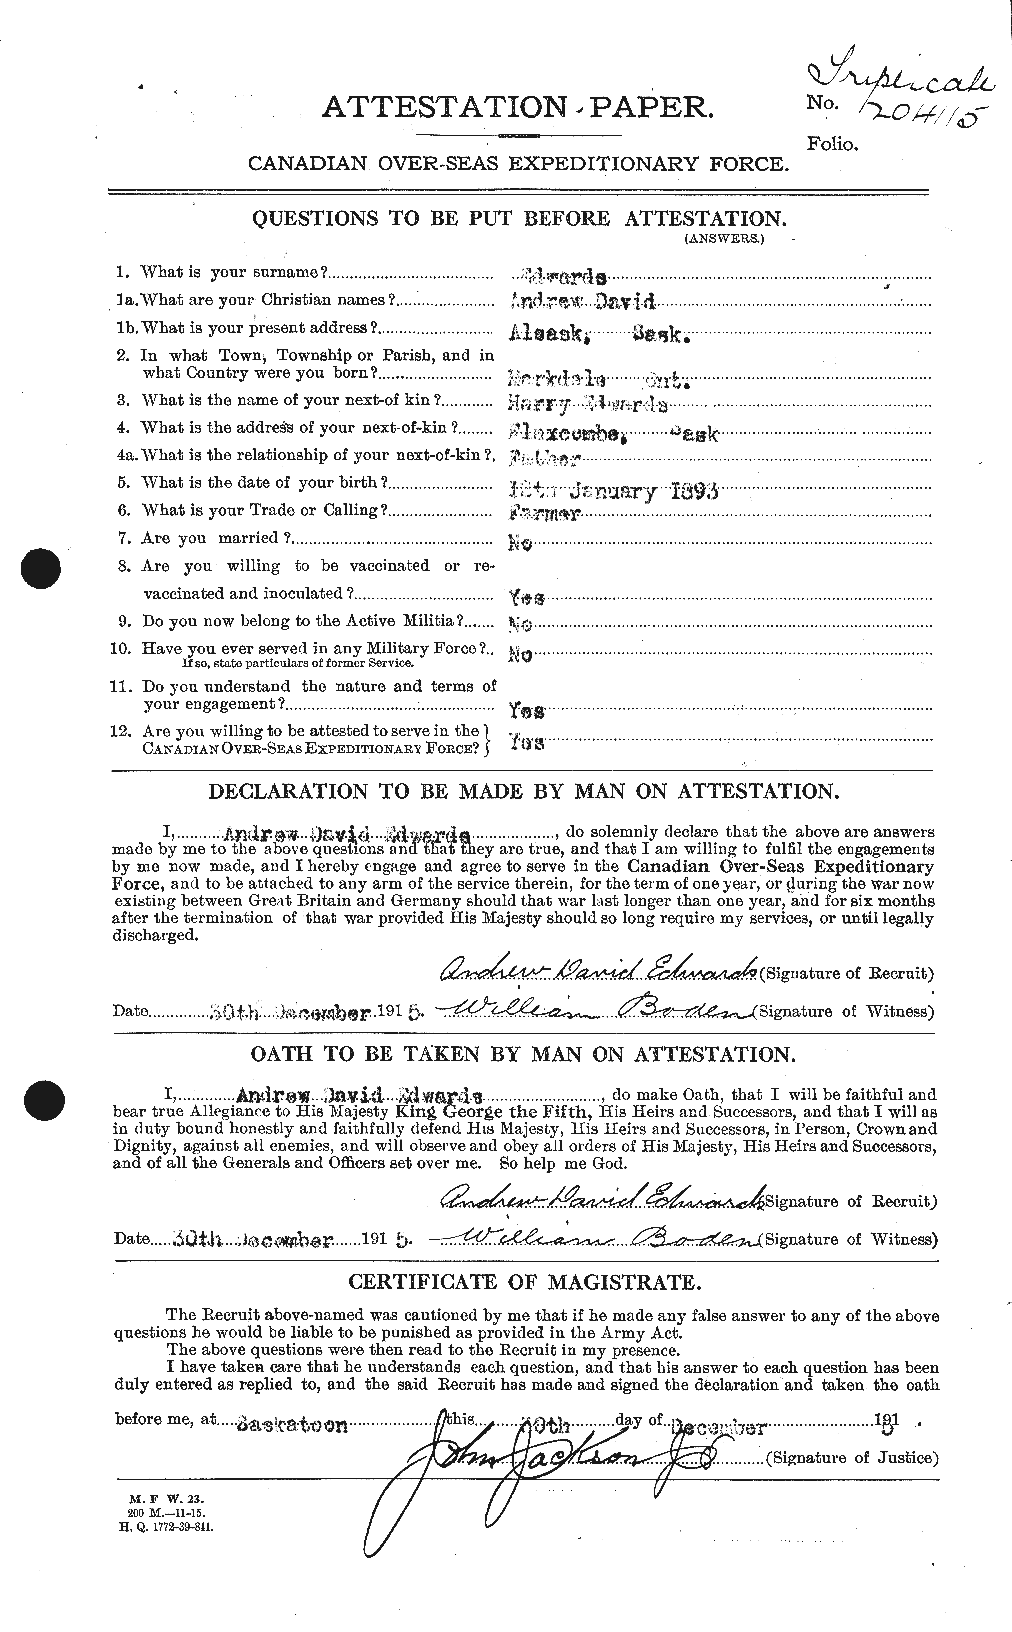 Personnel Records of the First World War - CEF 313117a